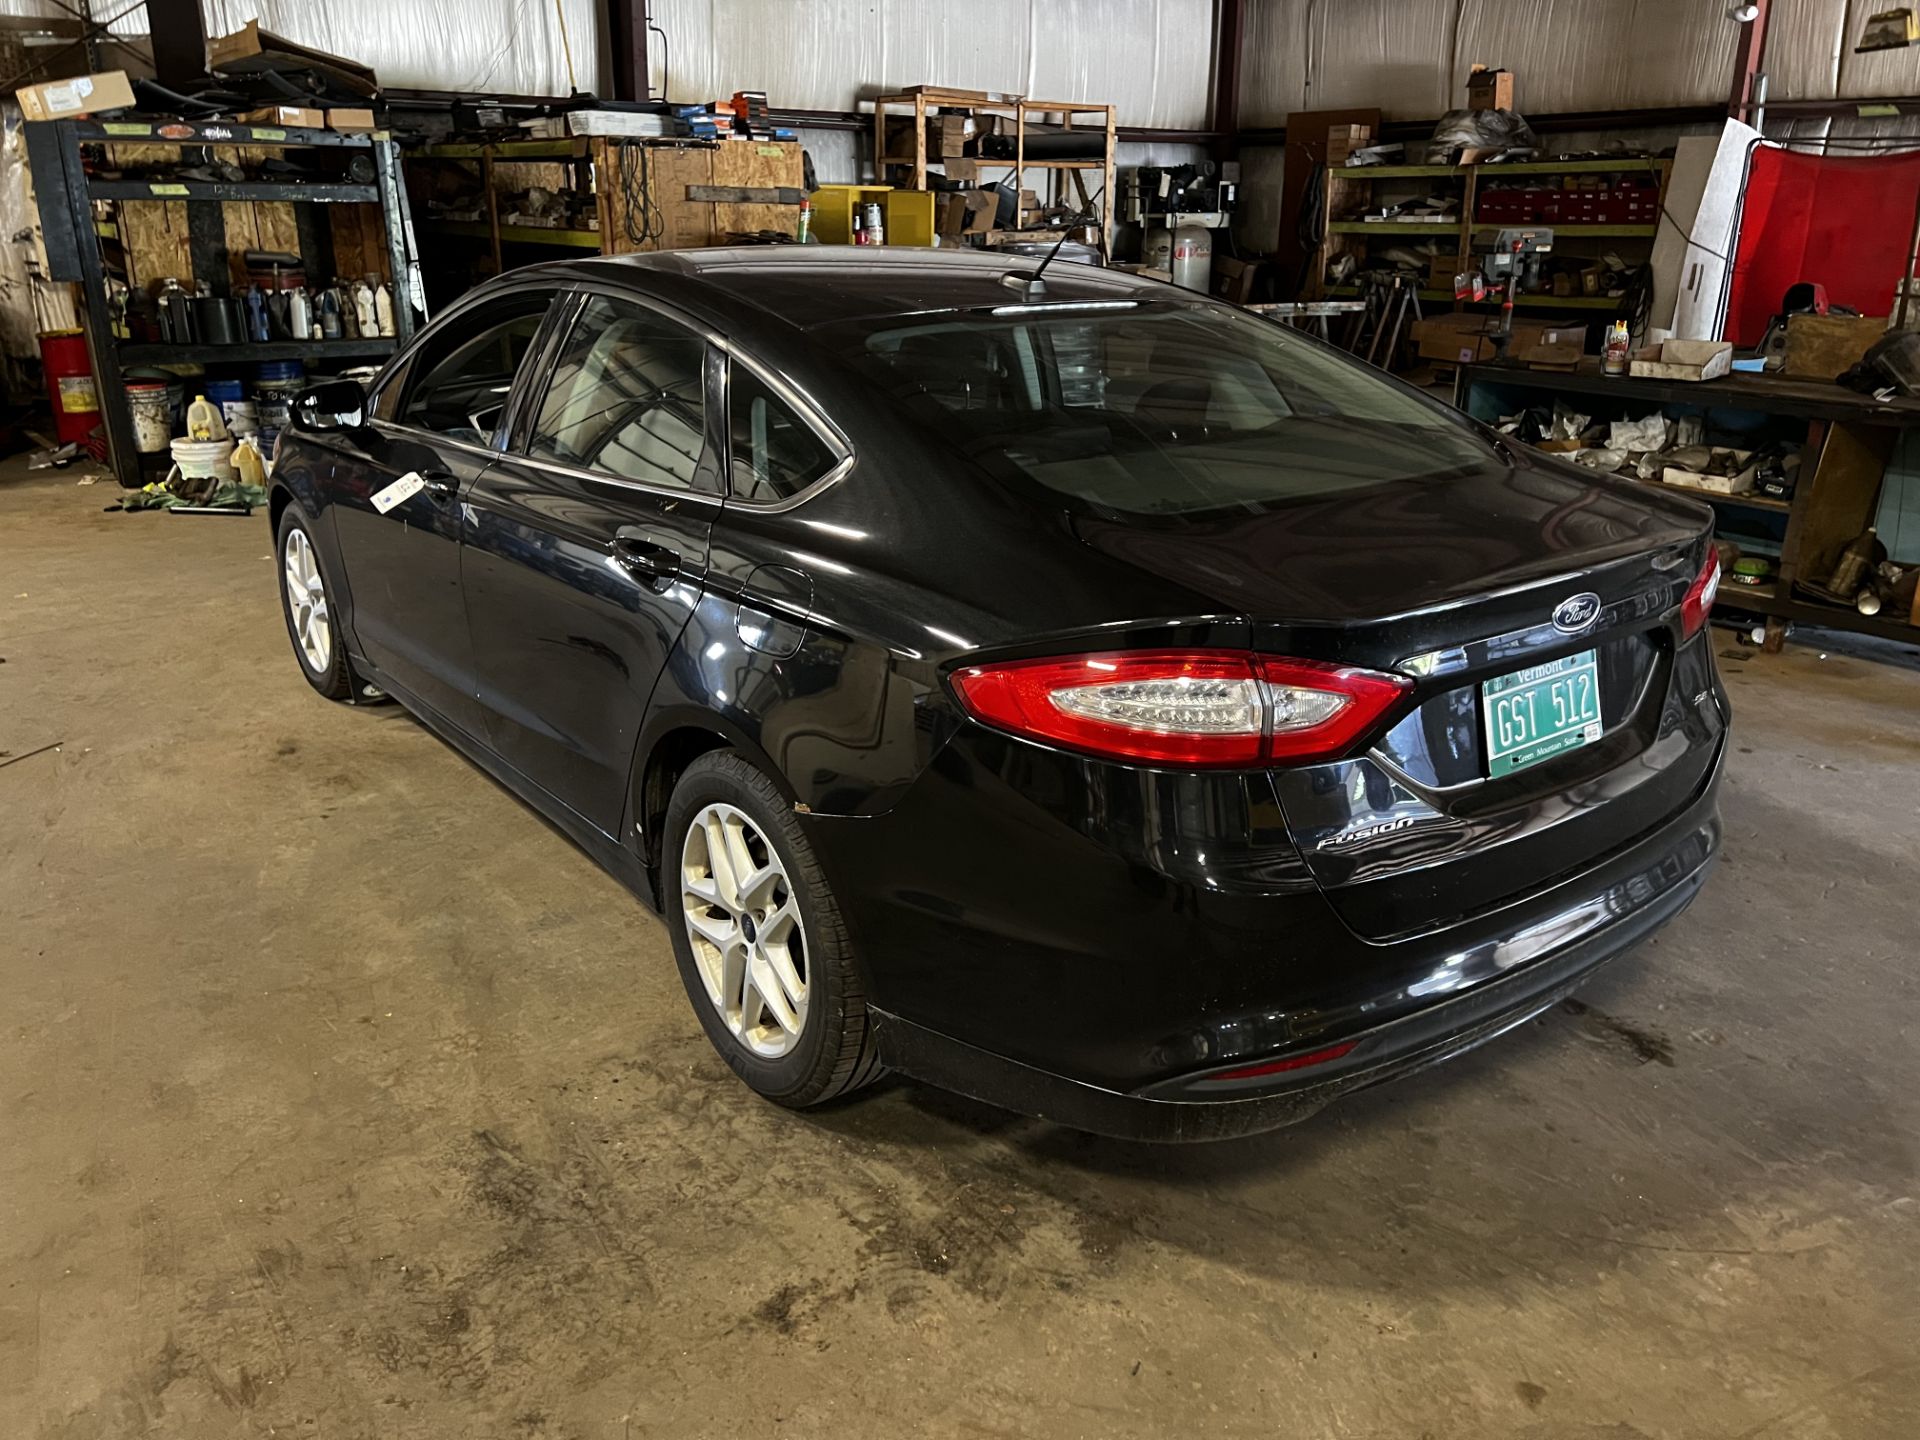 2014 Ford Fusion SE, Auto, A/C, Moonroof, FR Wheel Drive, 4 Cyl, Gas, 2.5 L, (Passenger Outside - Image 2 of 10